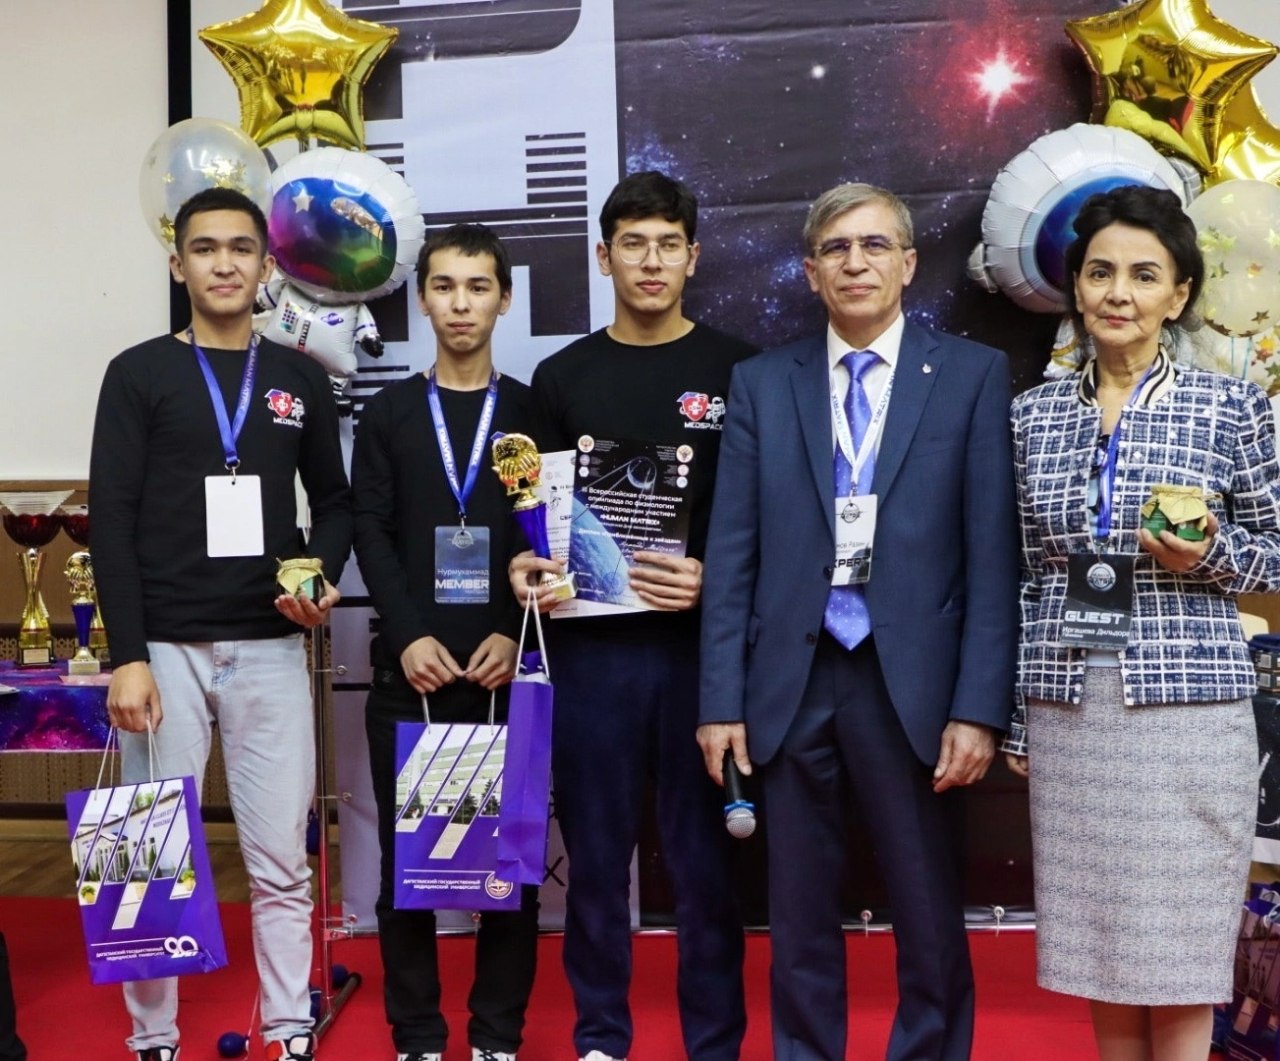 OUR STUDENTS ARE WINNERS OF THE INTERNATIONAL OLYMPIAD